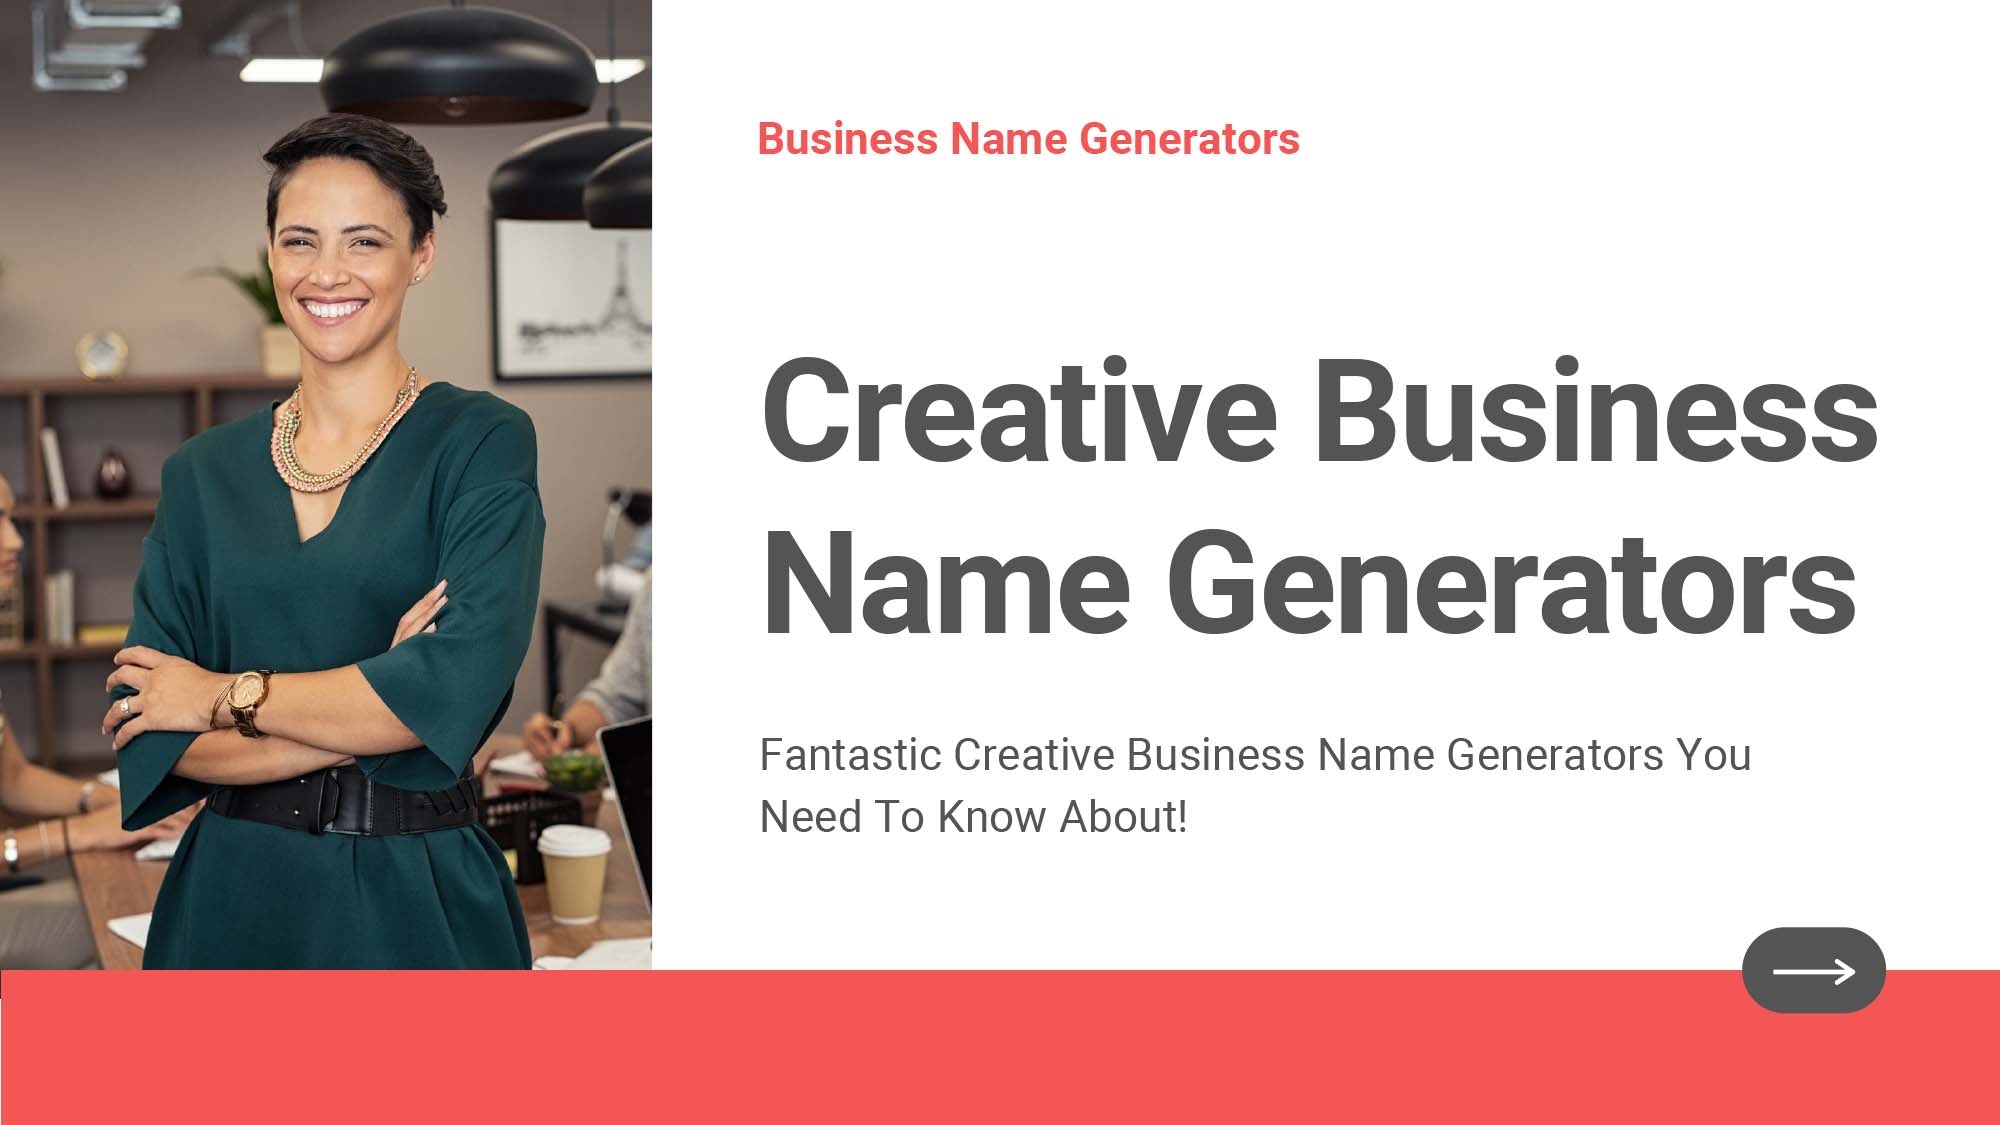 Fantastic Creative Business Name Generators You Need To Know About!